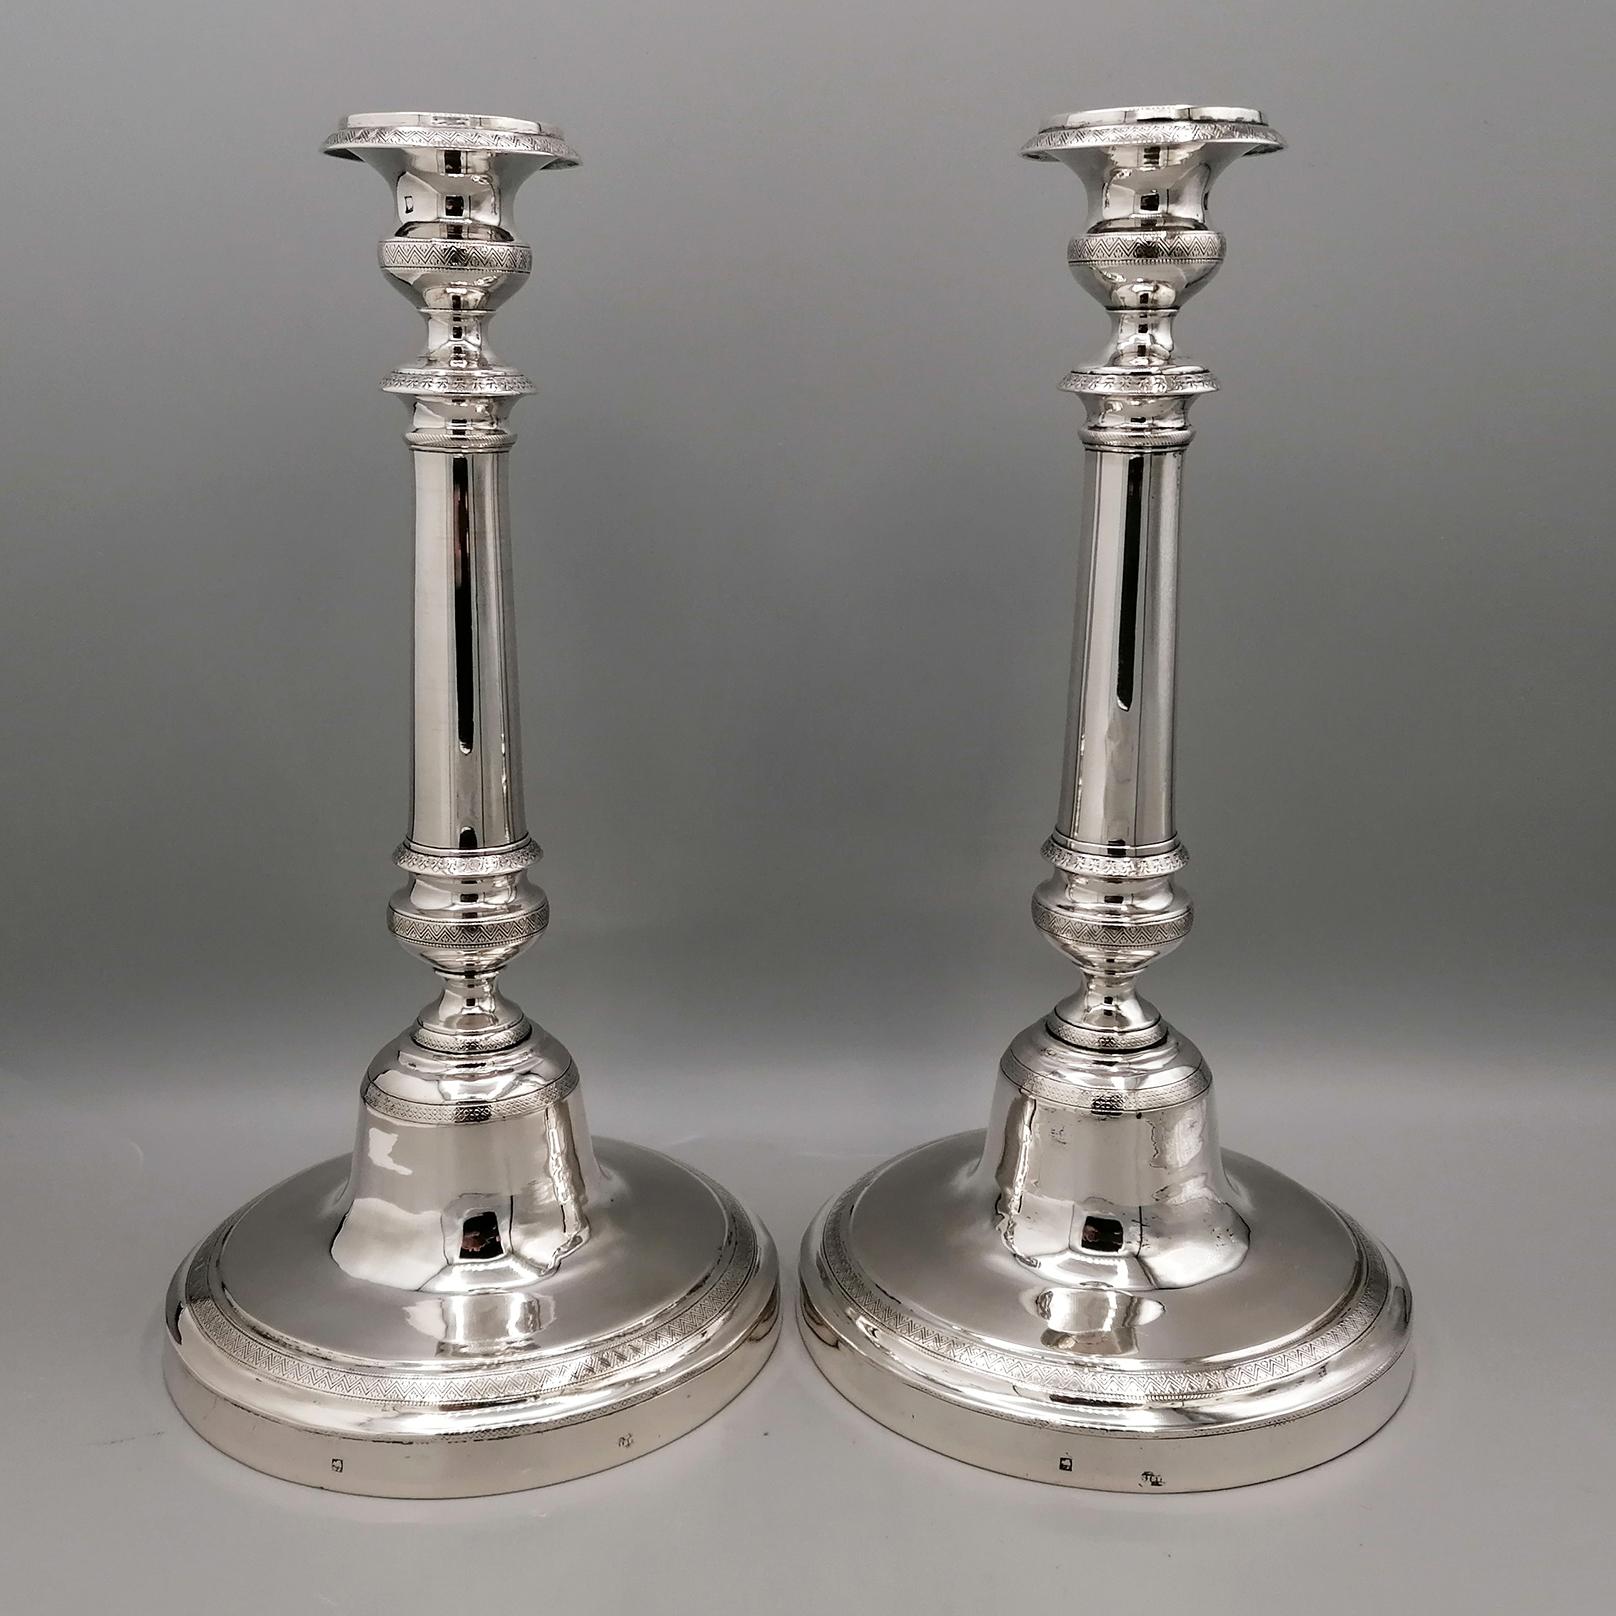 Pair of Italian silver candlesticks - Naples, c. 1840
The base is circular with a 